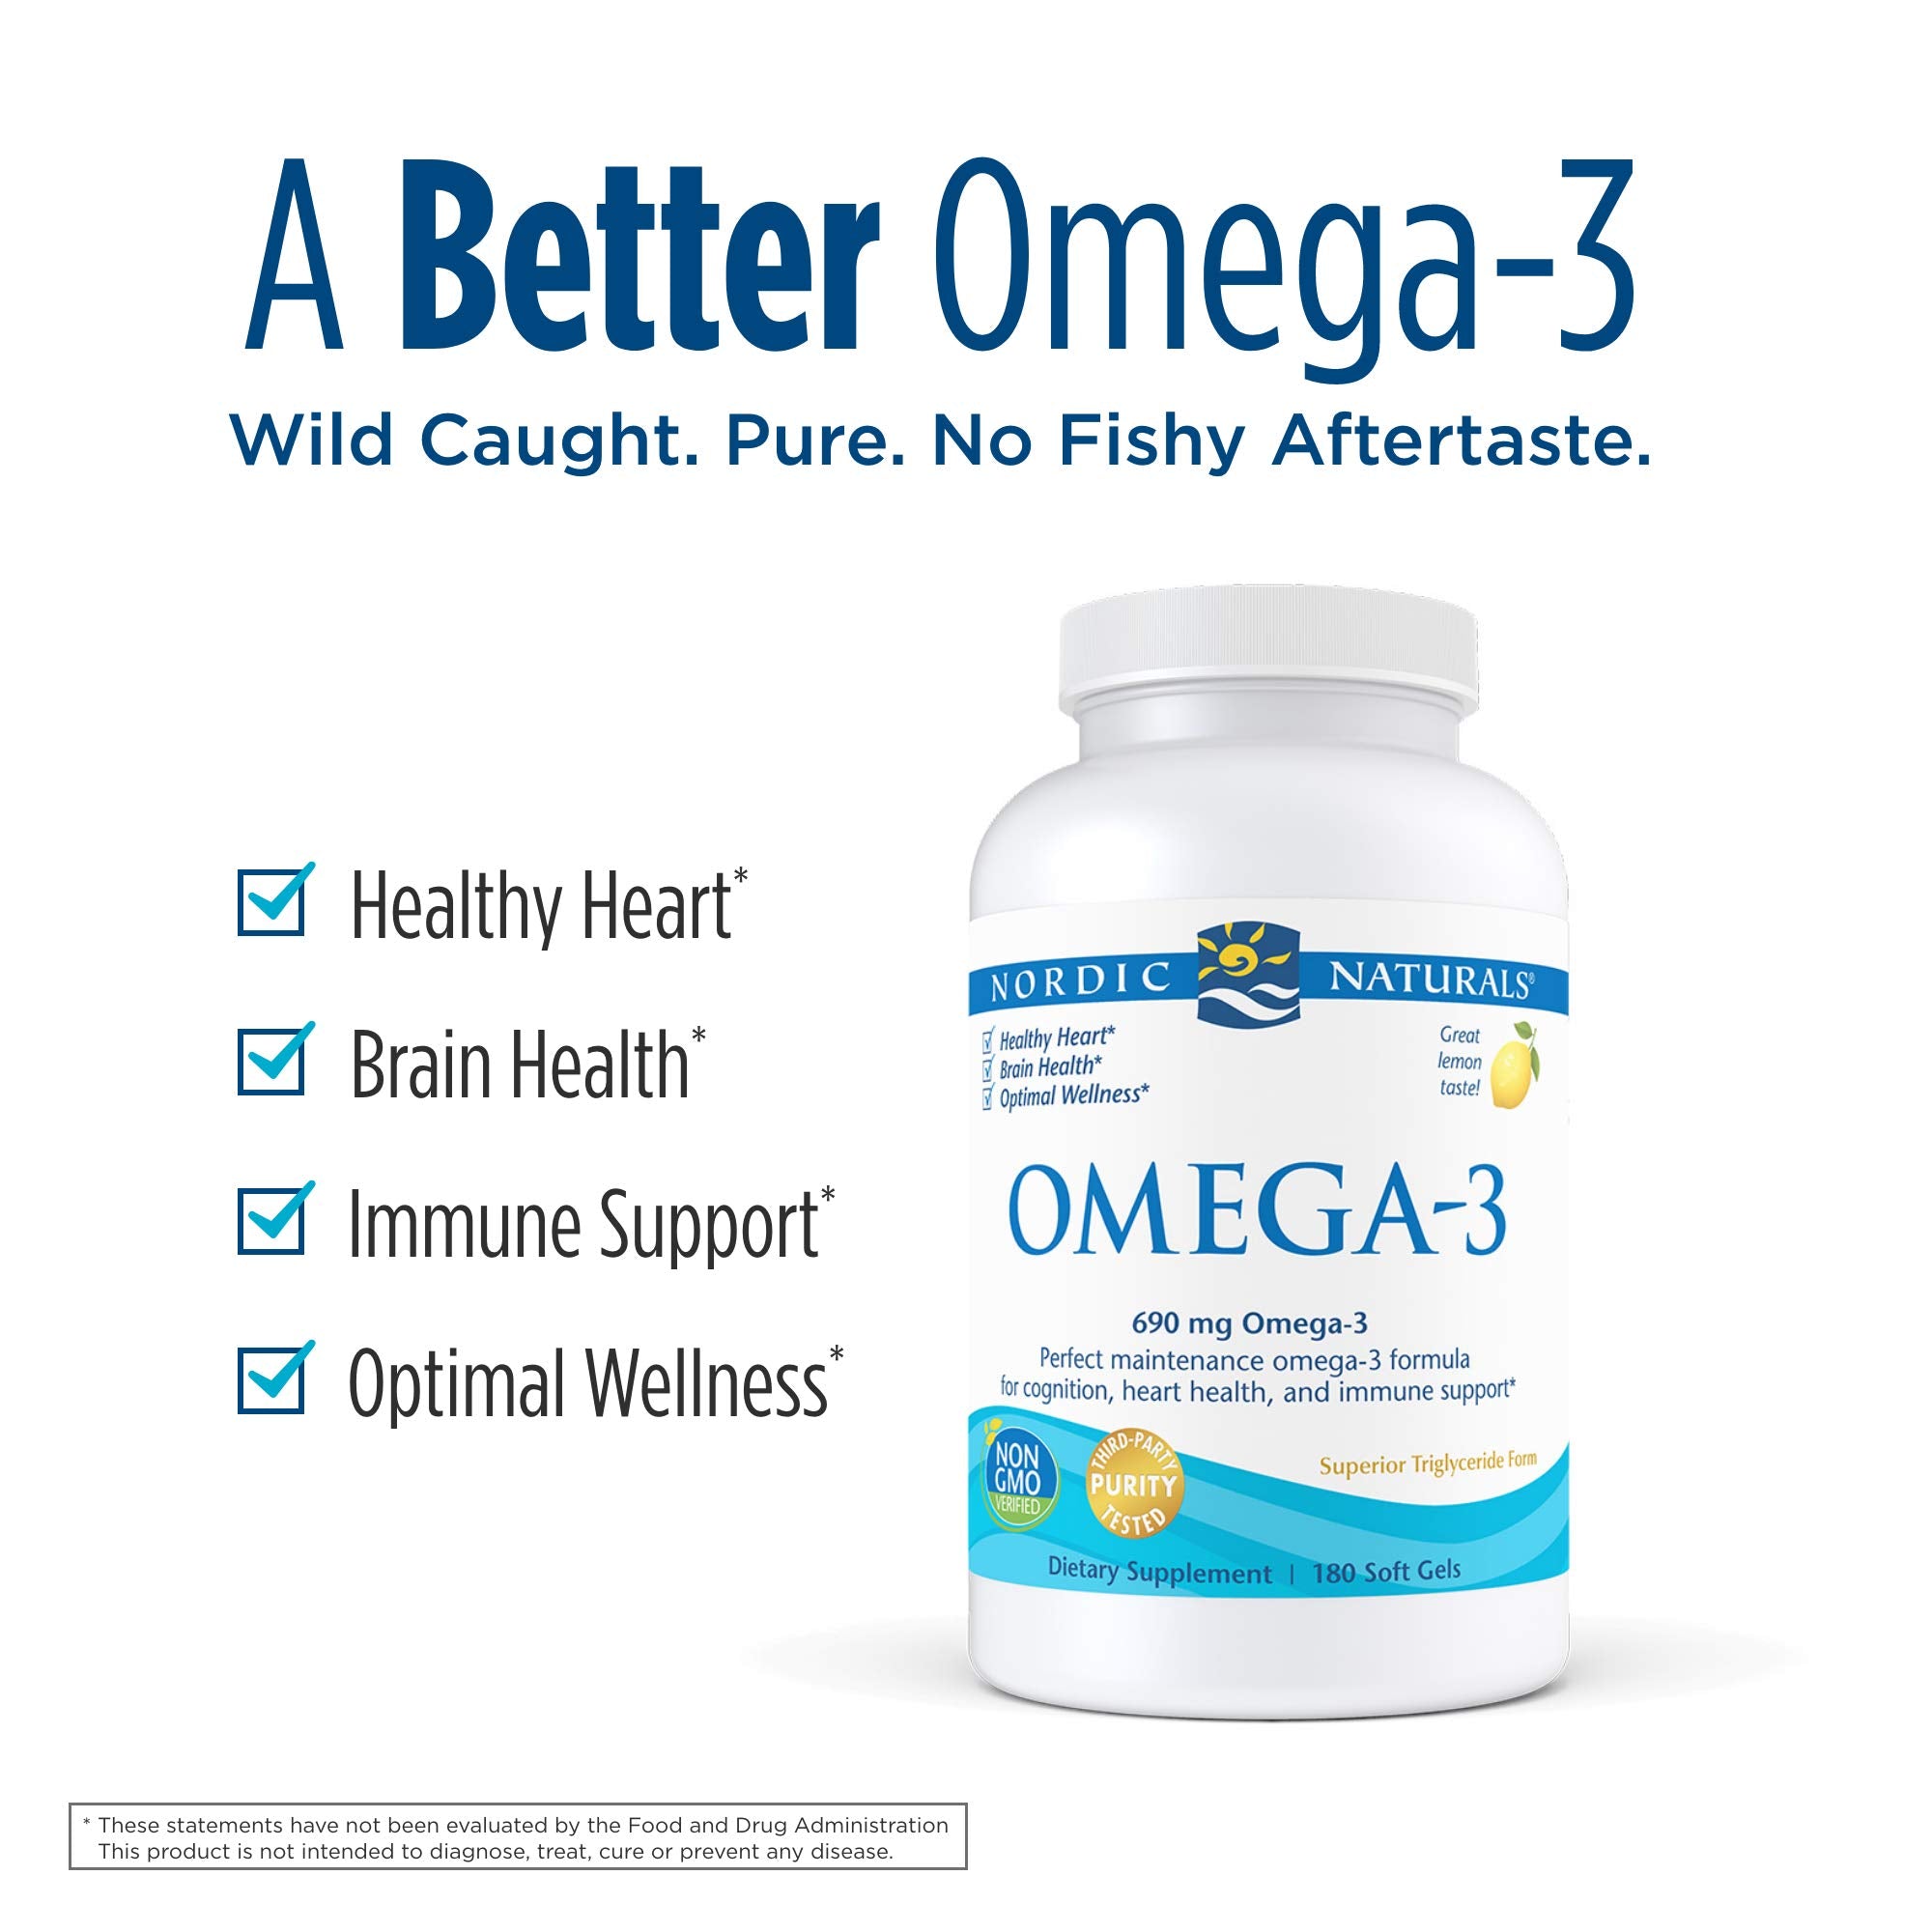 Nordic Naturals - Omega-3, Cognition, Heart Health, and Immune Support, 180 Soft Gels